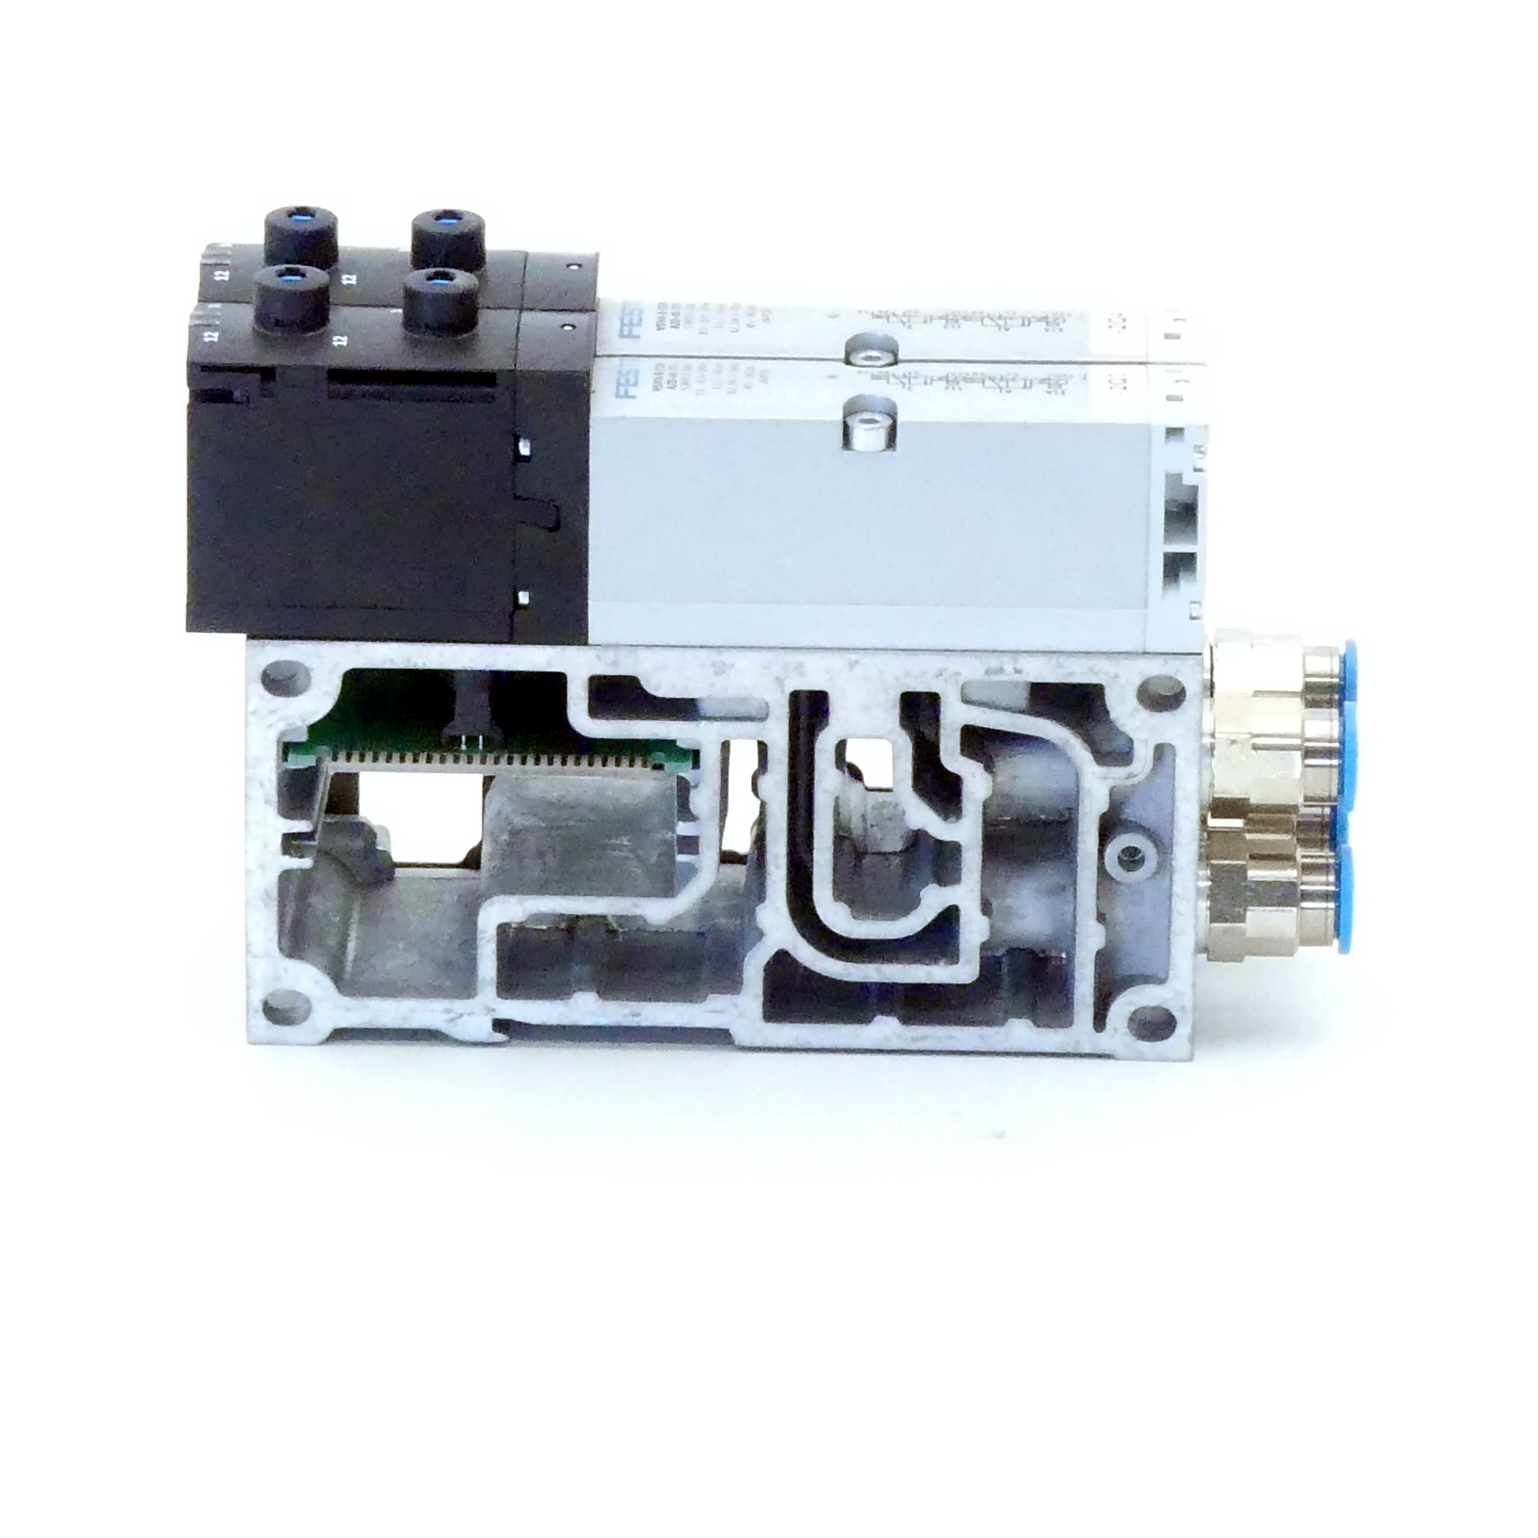 Solenoid valve with manifold plate 32N-AZD-A1-1T1L; VABV-S4-1HS-G14-2T2 